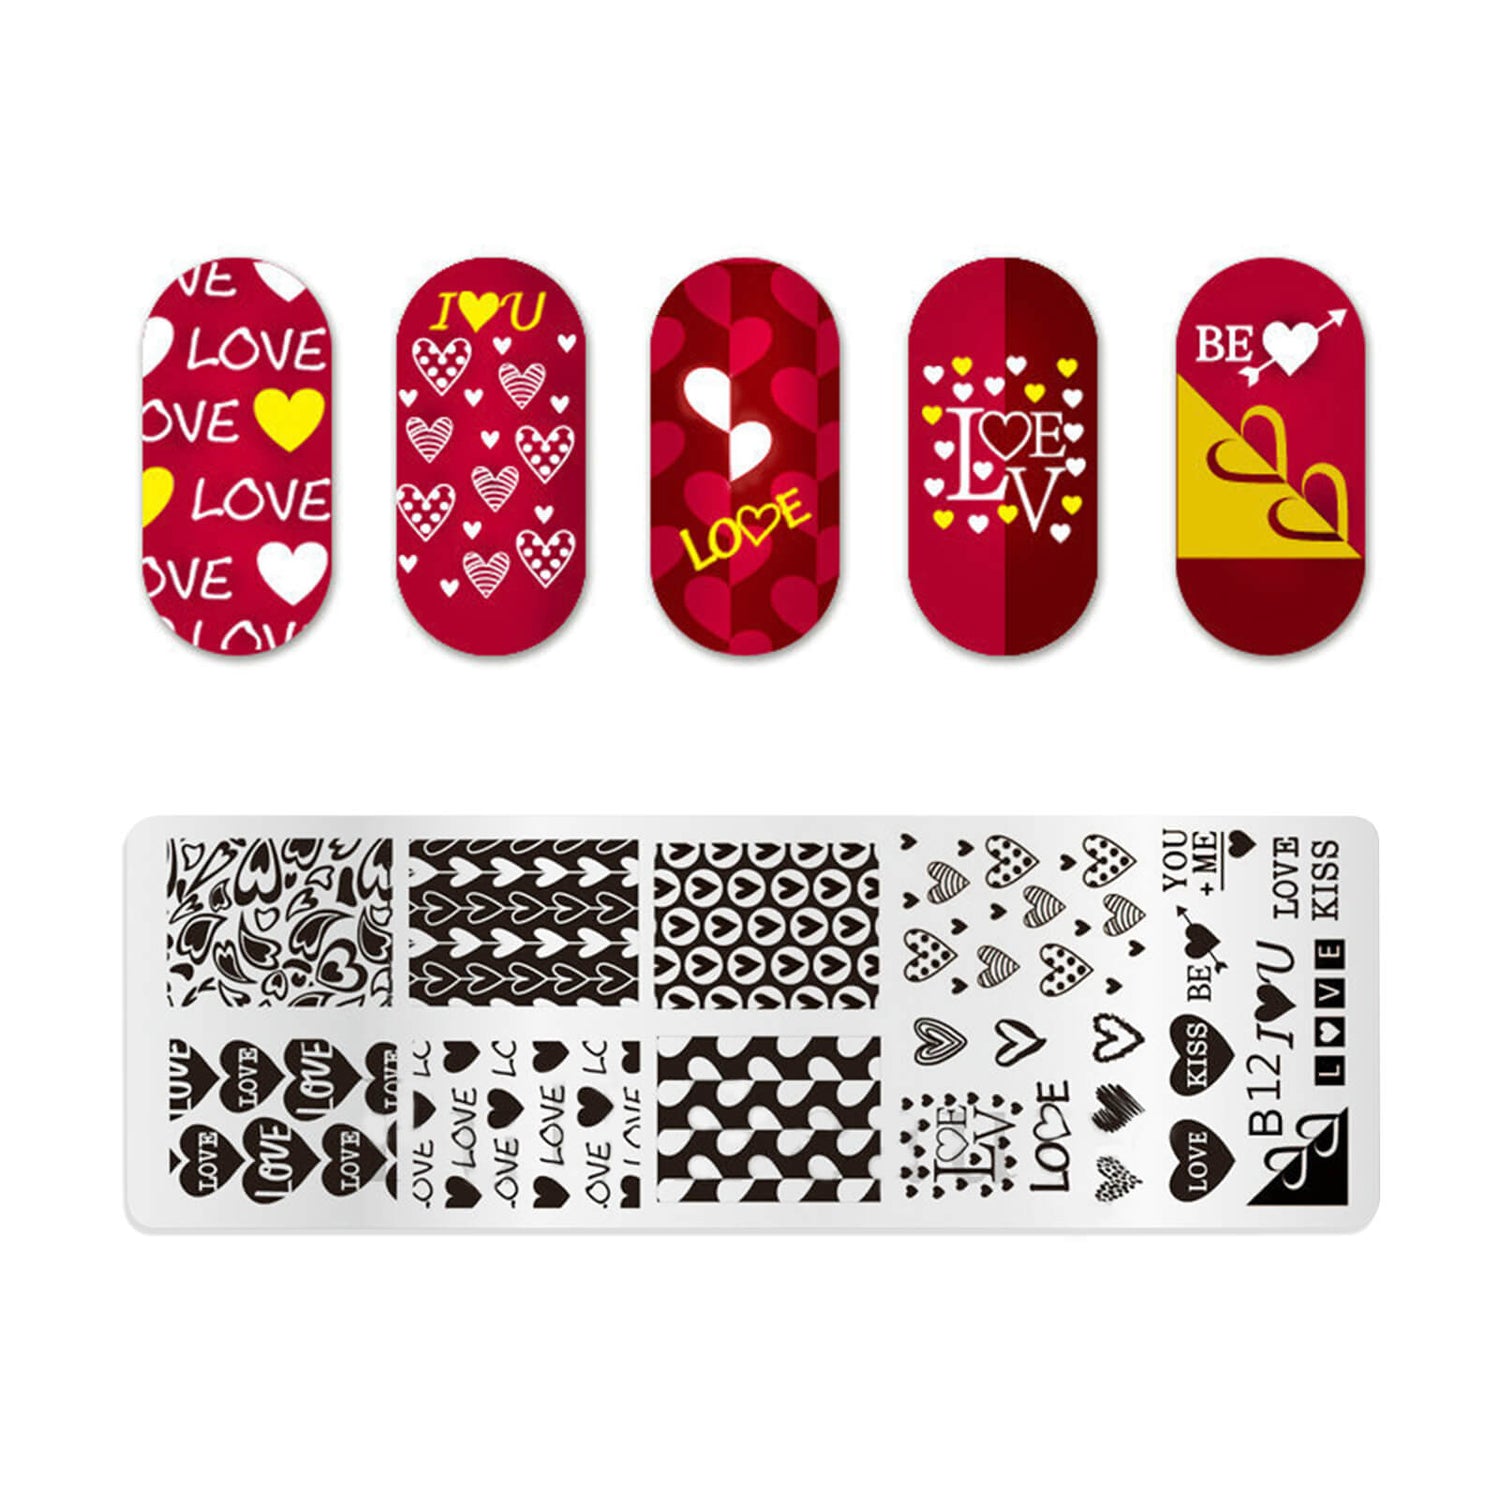 6PCS Valentine Nail Stamping Plates Kit with 1PCS Stamper & Scraper, Heart  Nail Art Stamp Templates with Heart Lips Diamond Love Design for DIY